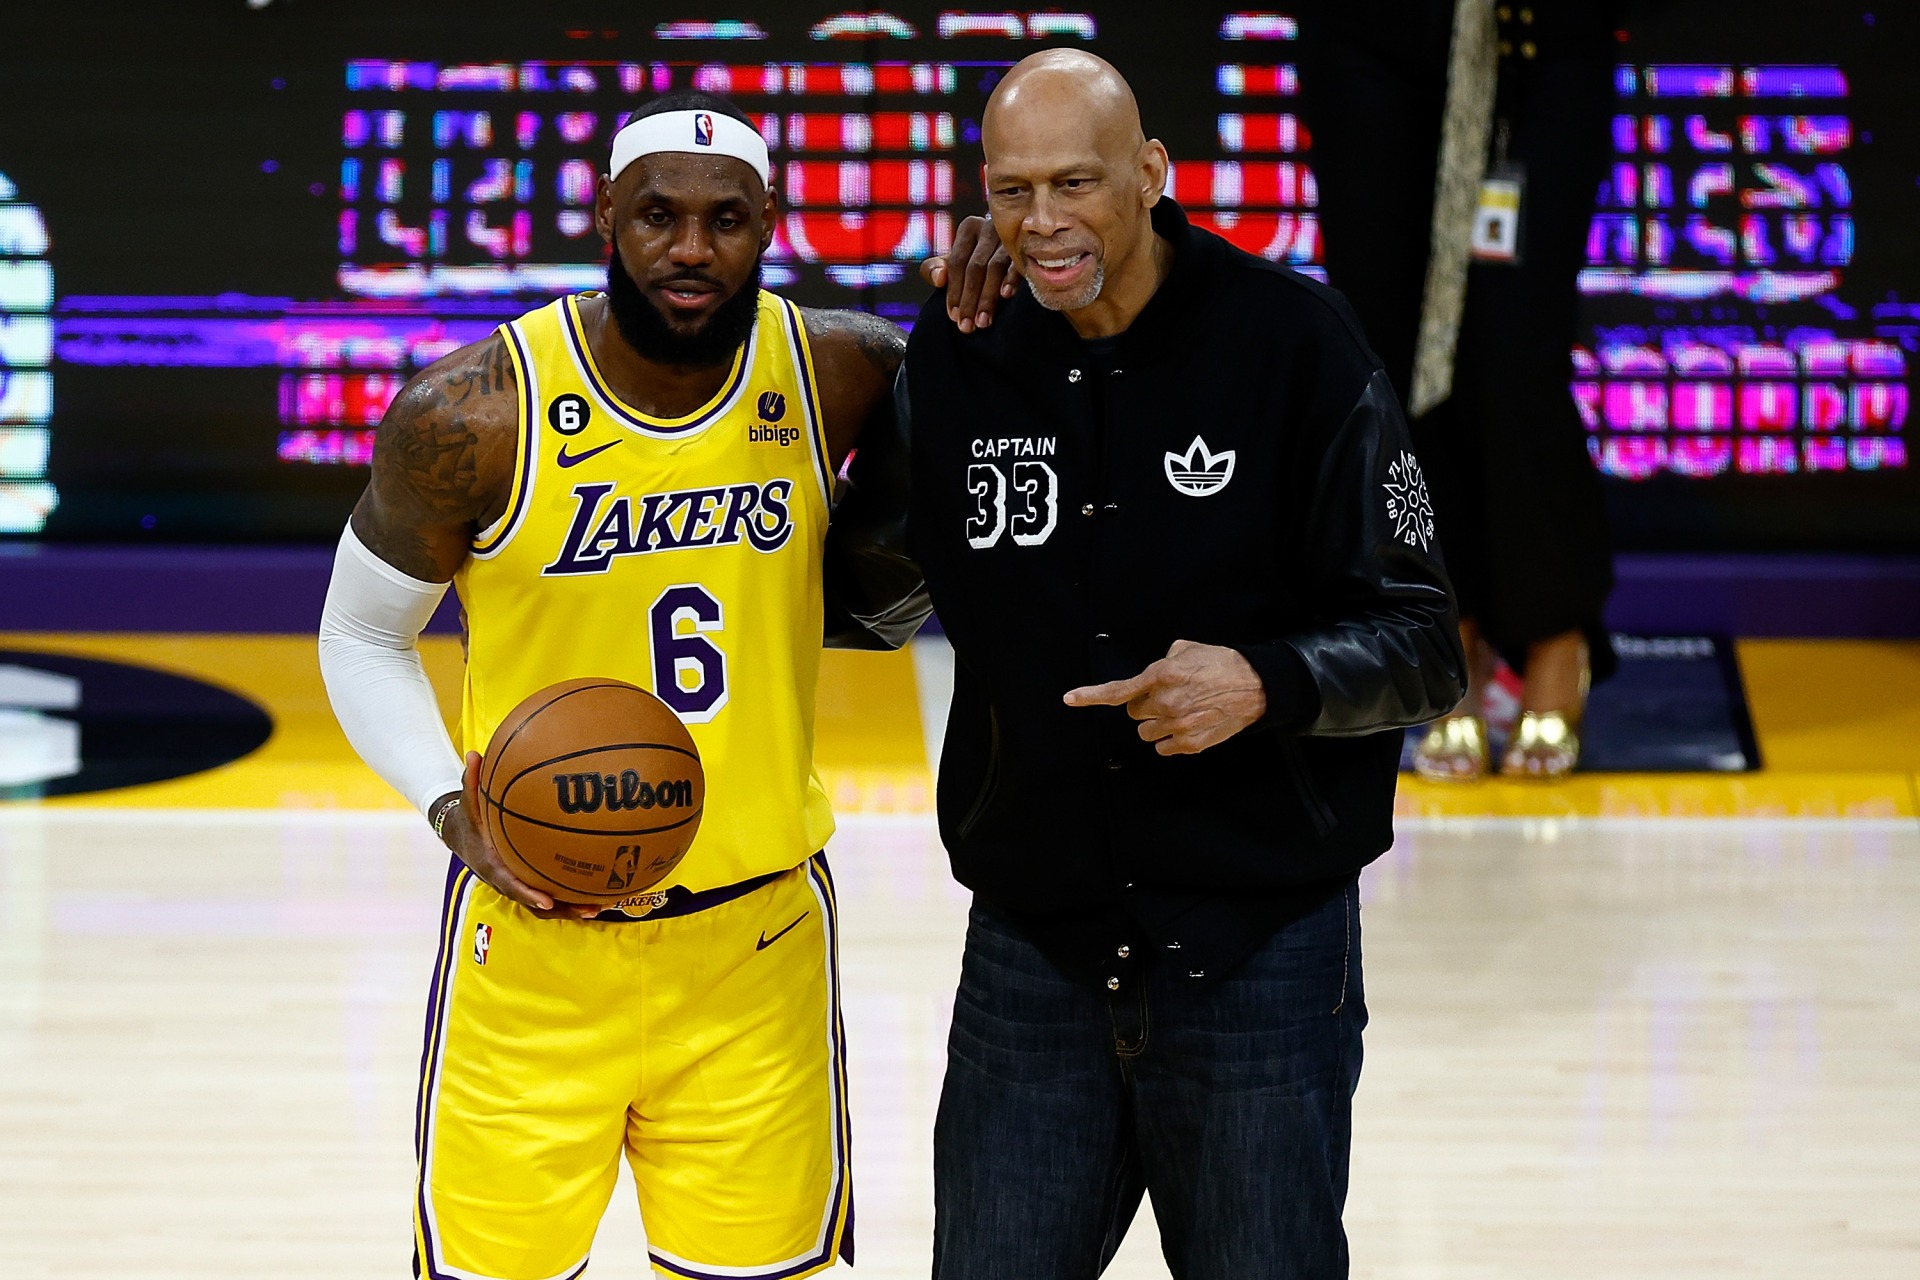 LeBron James: Legacy, Greatness and Los Angeles Lakers Lore